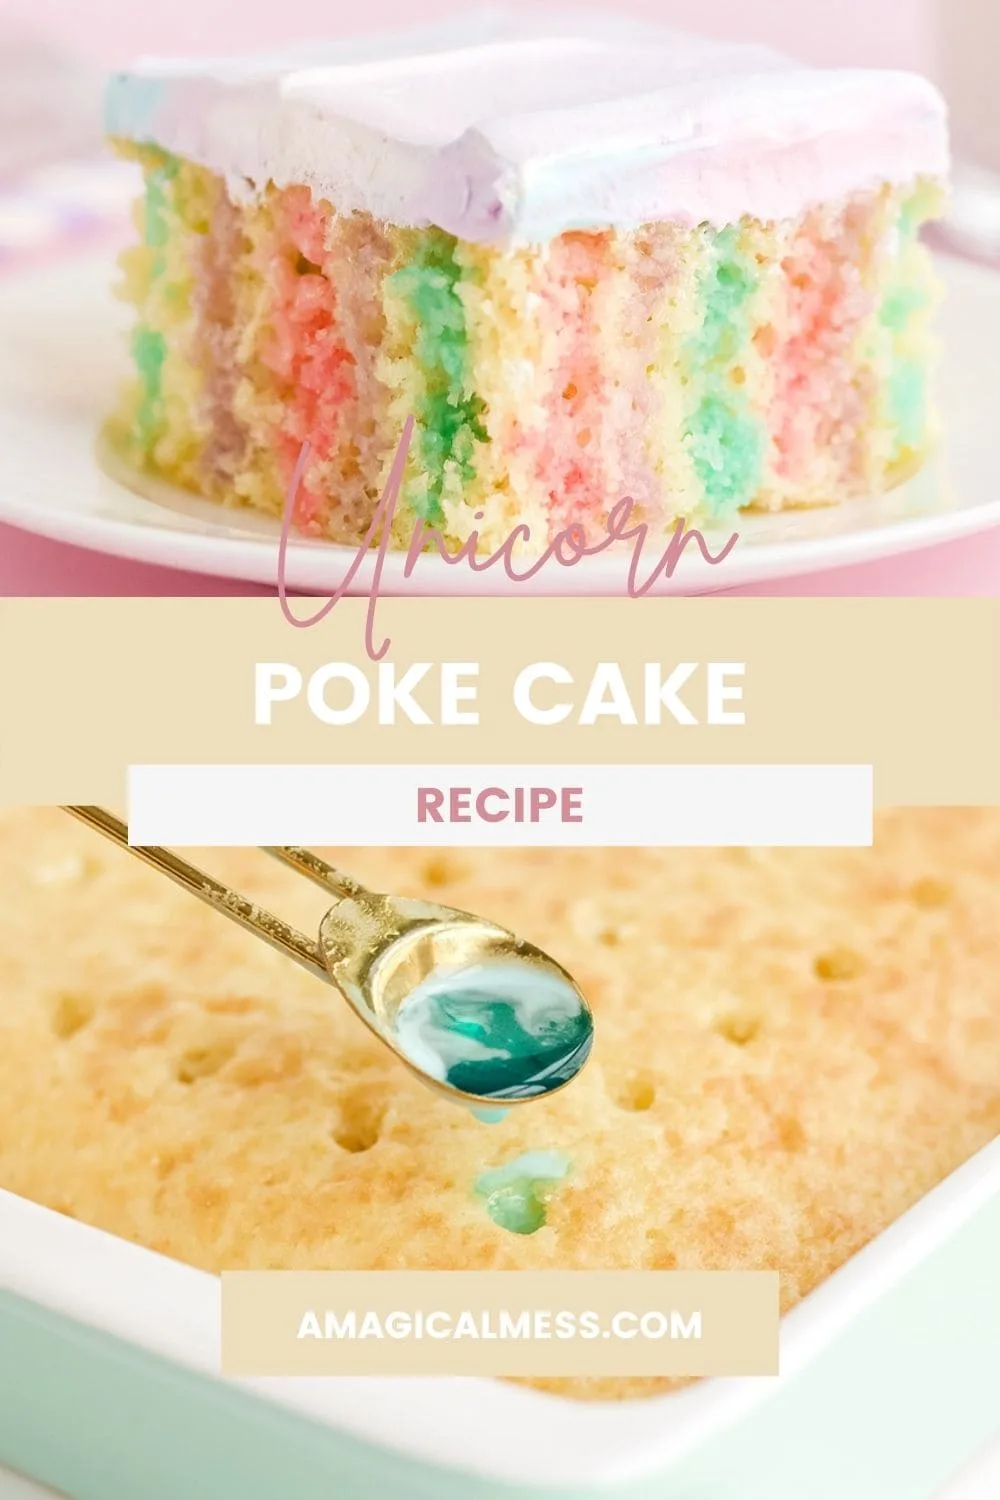 Plate with unicorn poke cake on it and holding jello over cake with holes in it.